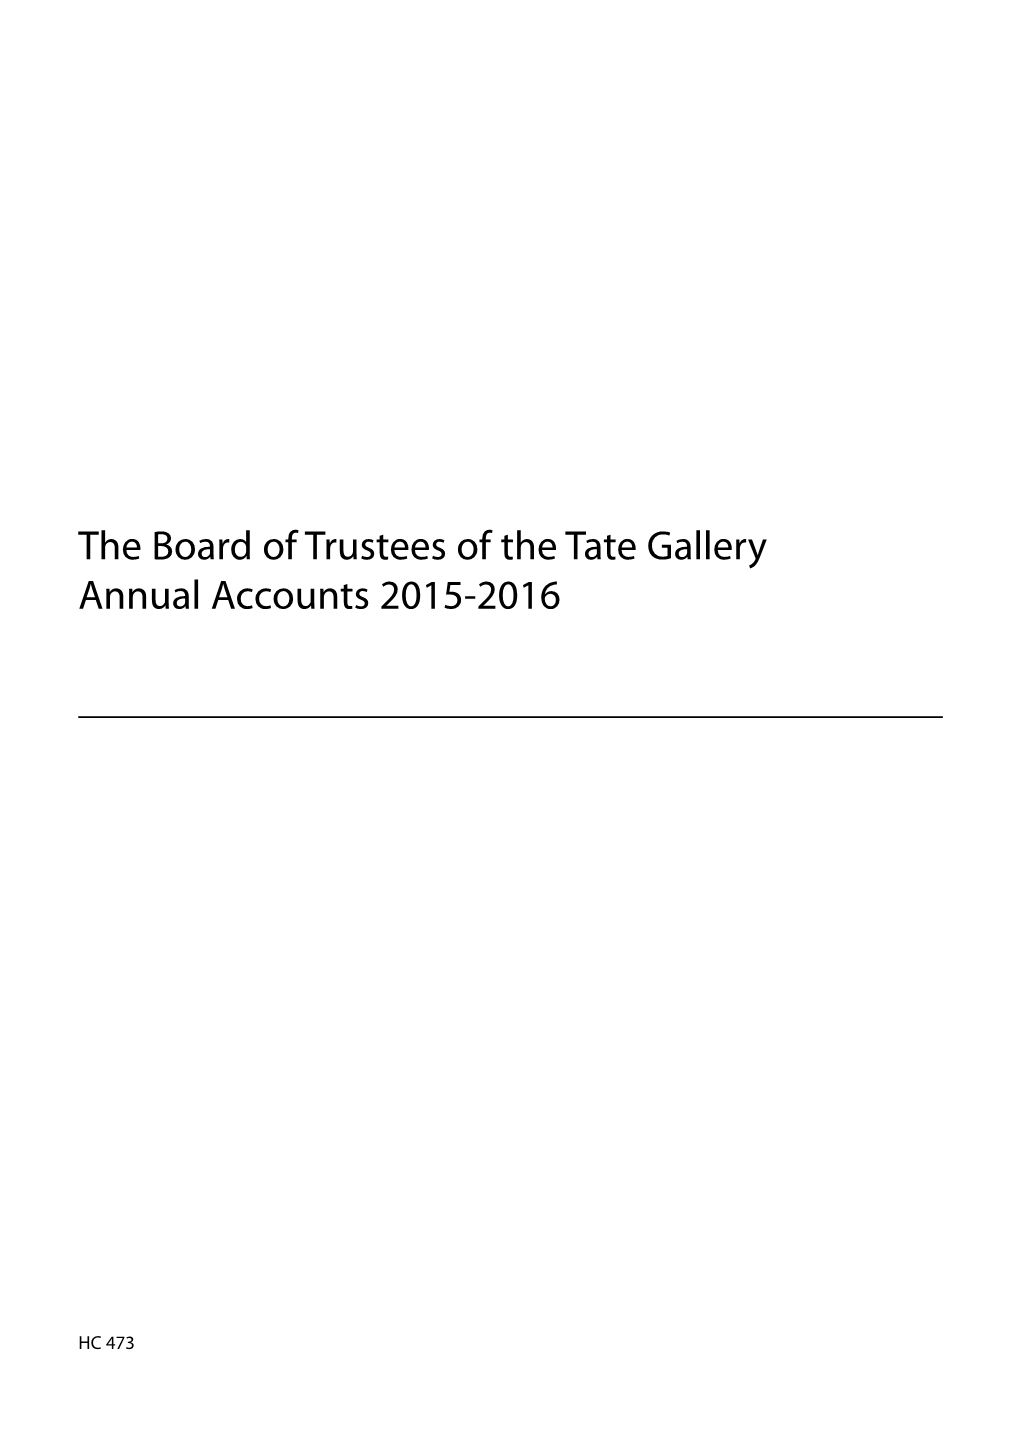 The Board of Trustees of the Tate Gallery Annual Accounts 2015-2016